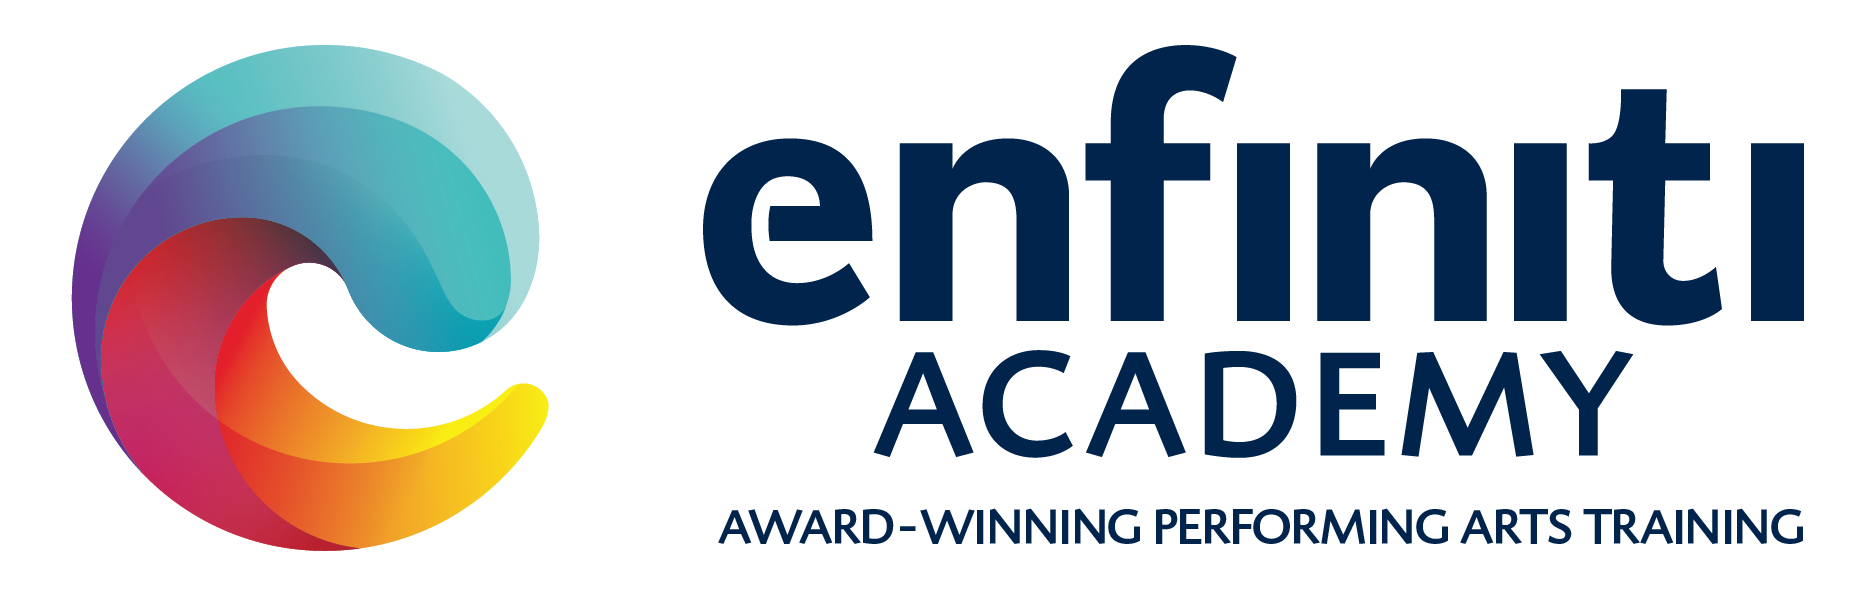 Enfiniti Academy of Performing Arts